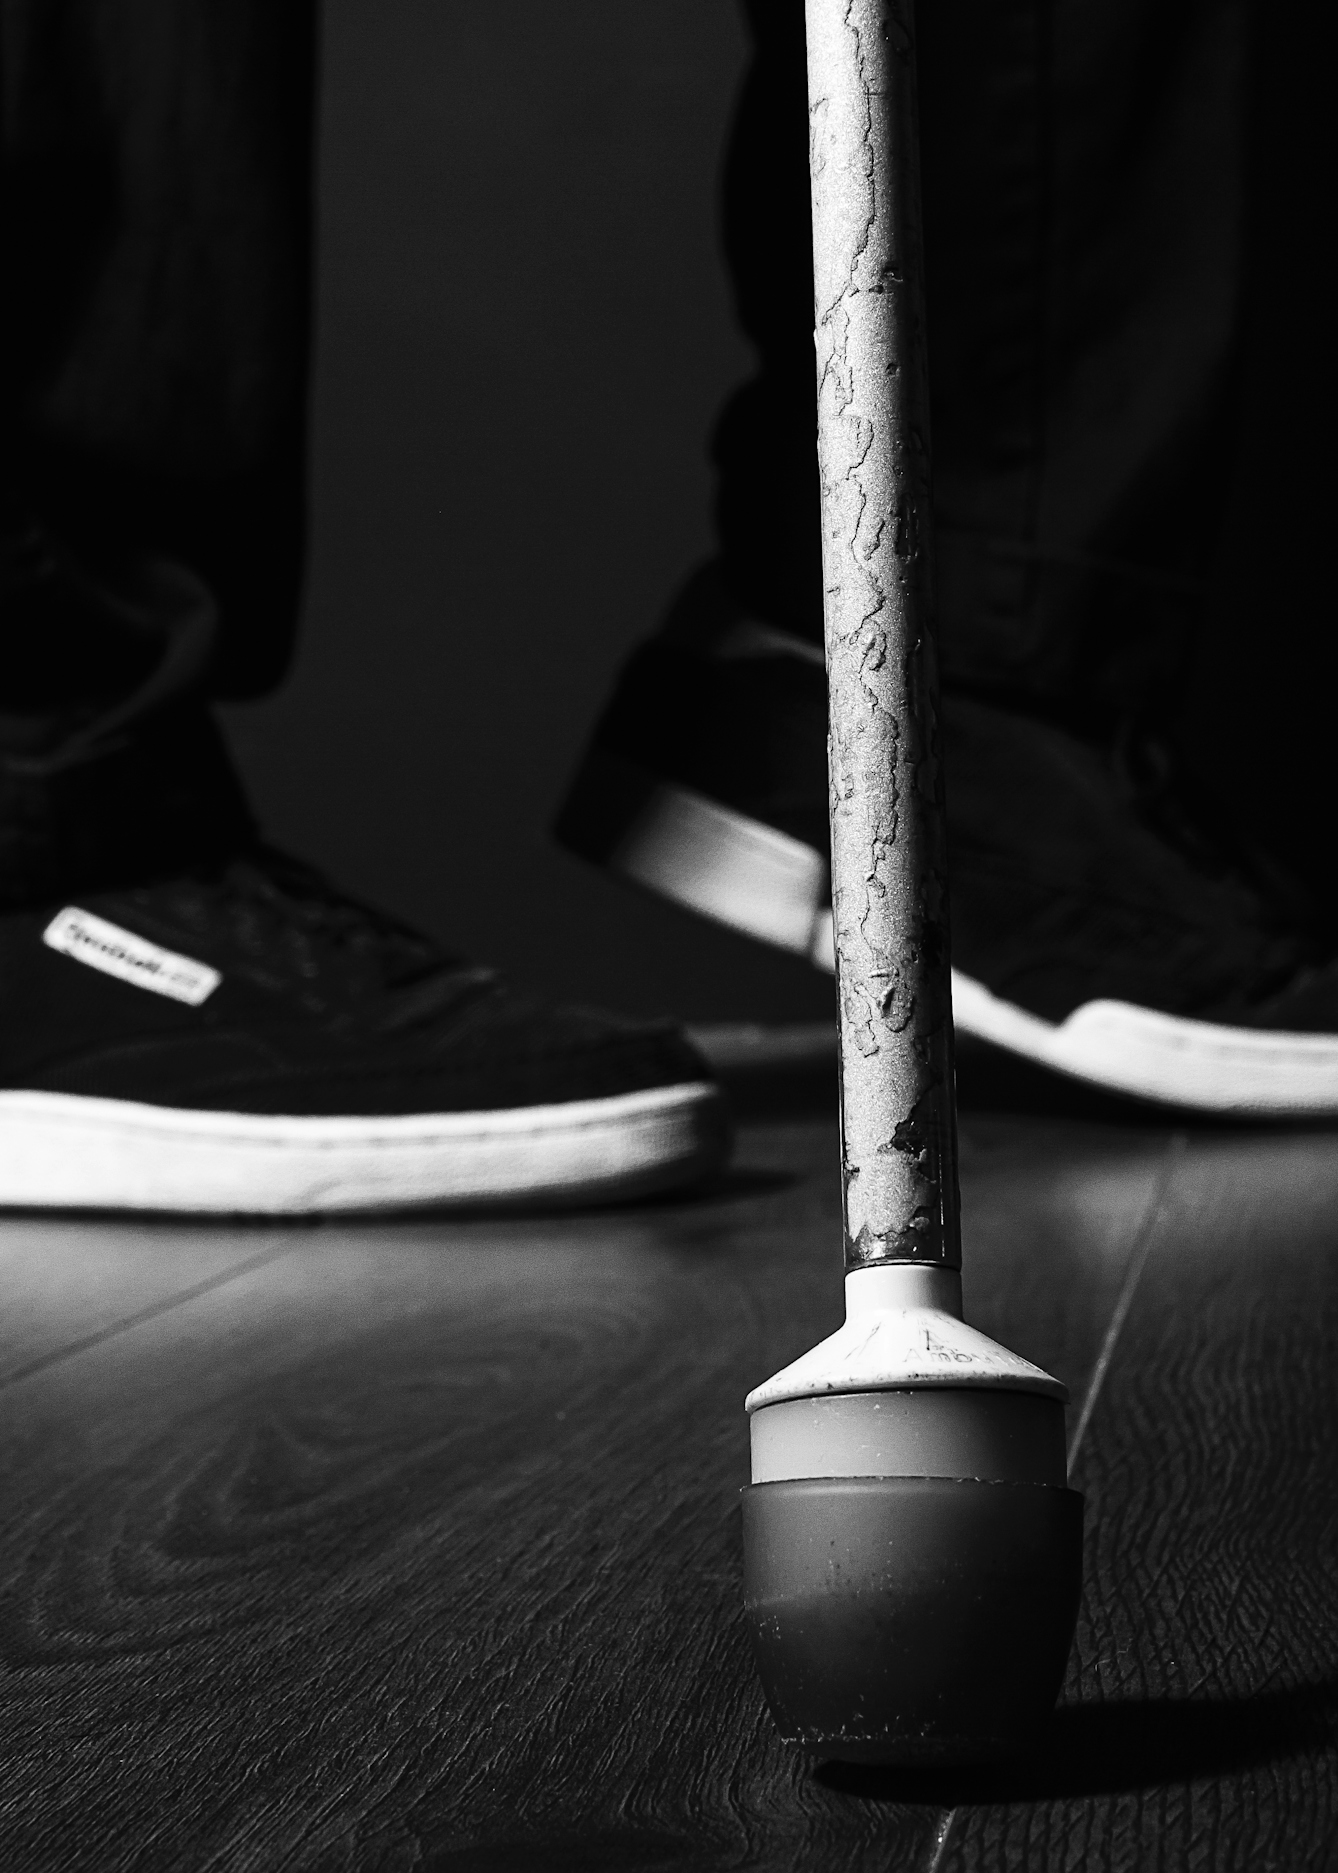 Black and white photograph of the roller tip end of a white cane resting on a wooden floor. The image is close-up on the cane so the chipped paint can bye clearly seen. In the background the feet of the person holding the cane can eb seen, white soled trainers and black trousers. The background is a dark grey making the cane a stark feature within the image.